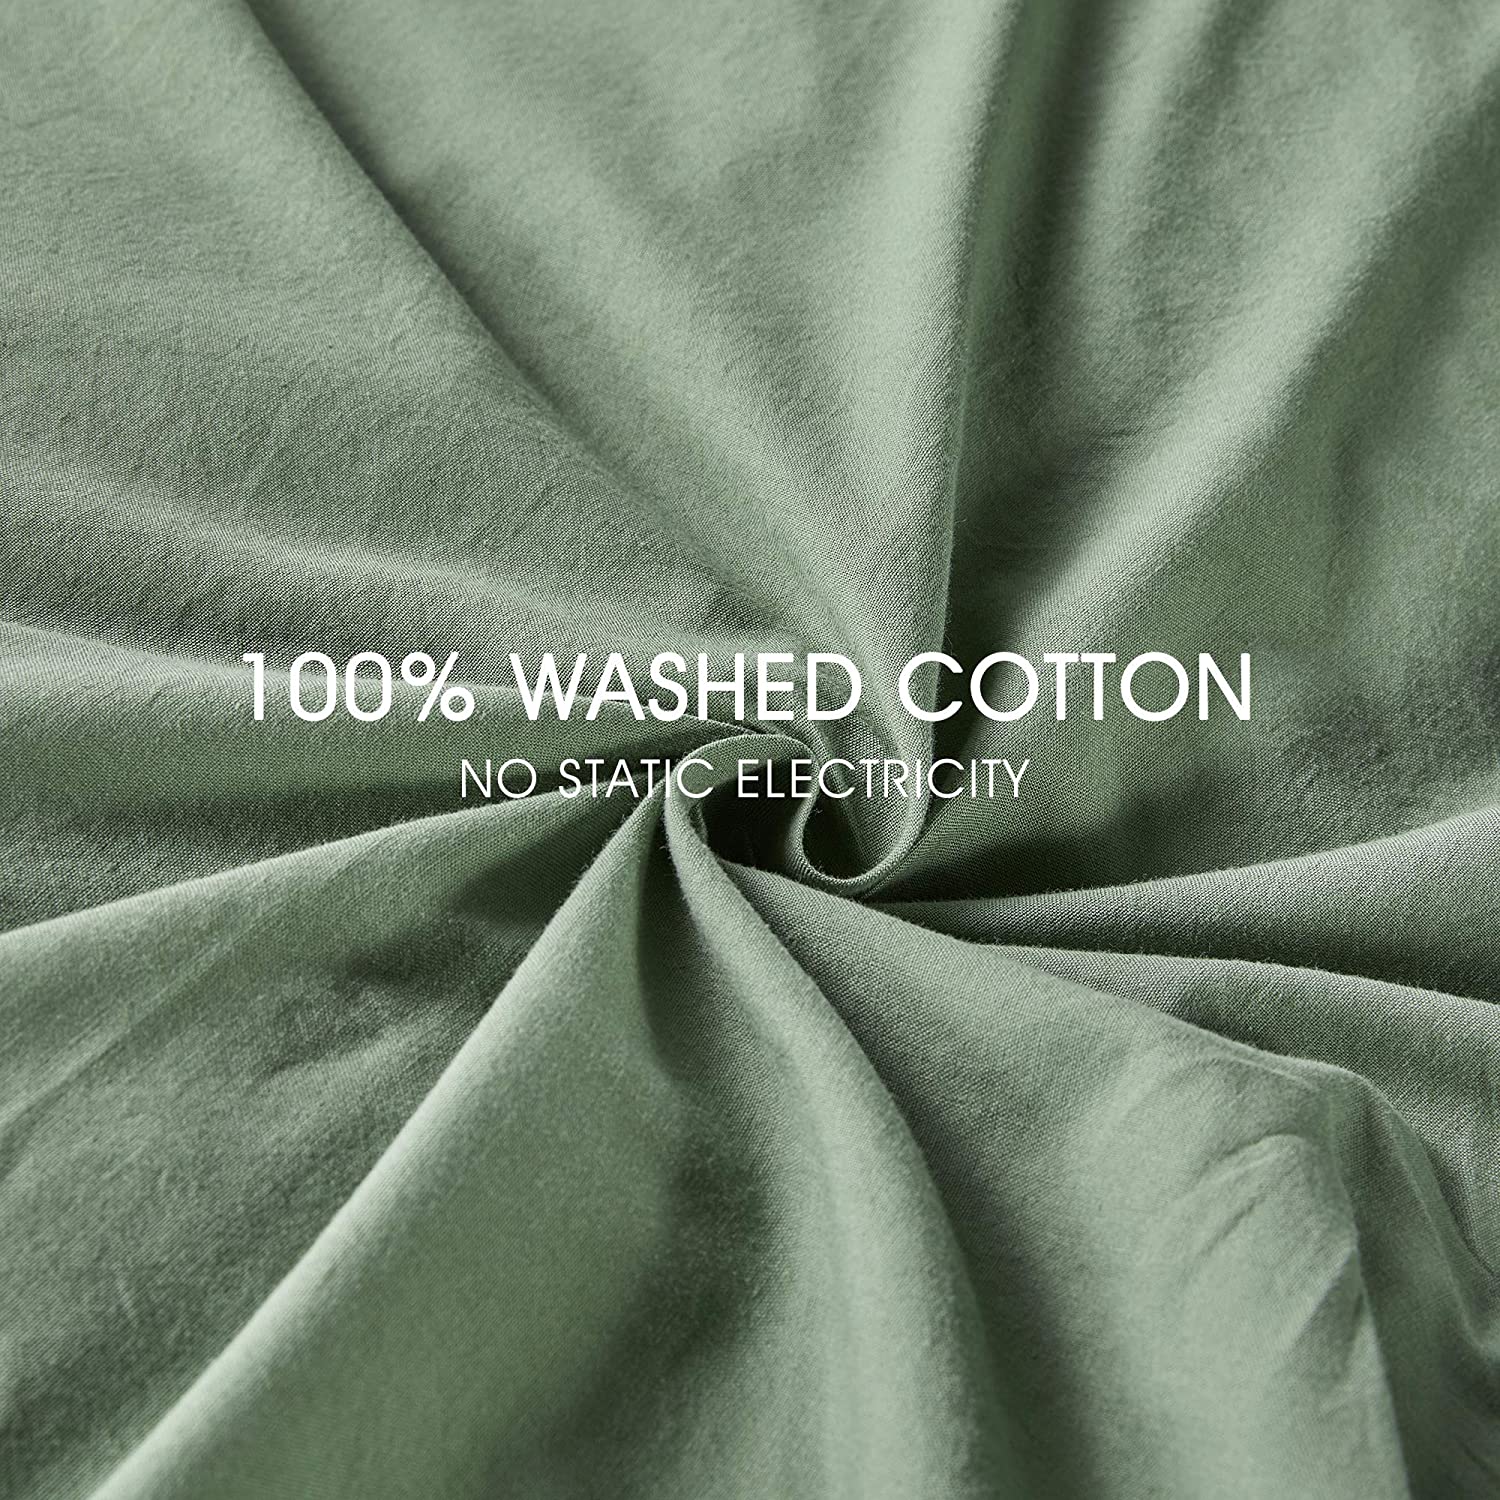 Washed Cotton Duvet Cover Set Green with Button Closure